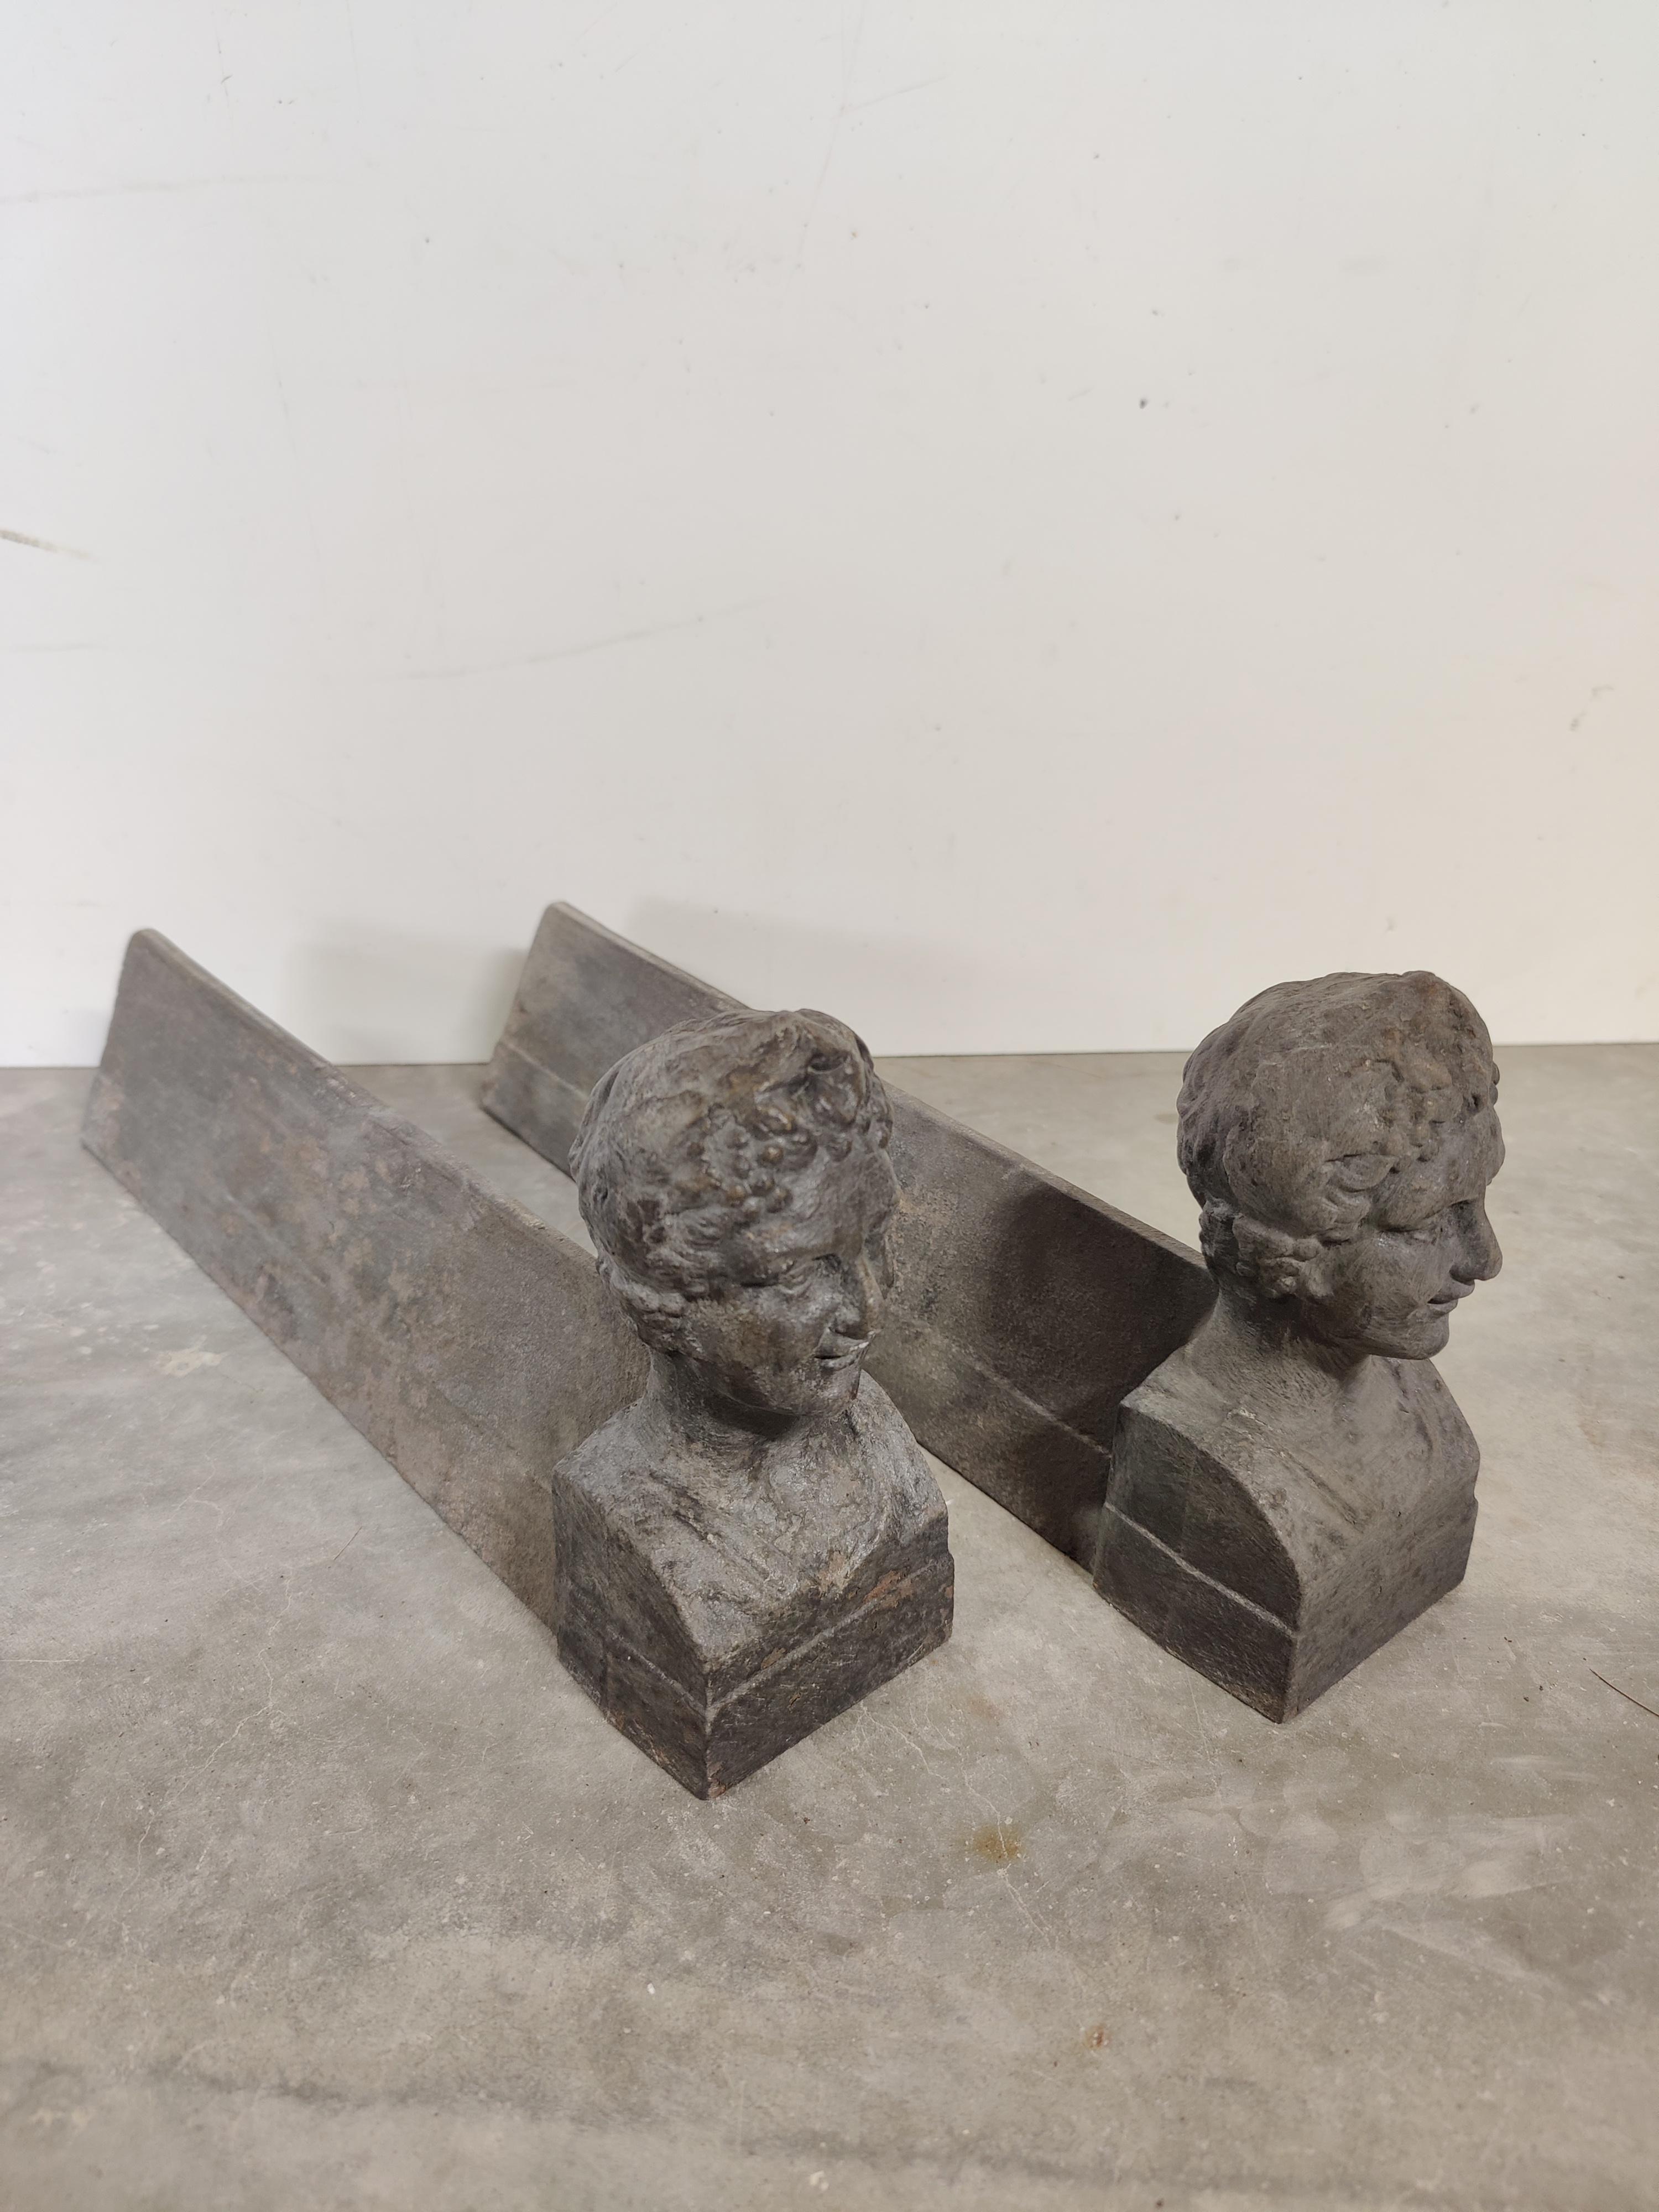 Antique French Andirons, young Caesar.

Weight: 16 lbs / 7 kg.

Upon request they can be made black / pewter.

See all our antique fireplaces and fireplace accessories at 1stdibs by pressing the ‘View All From Seller’ button.